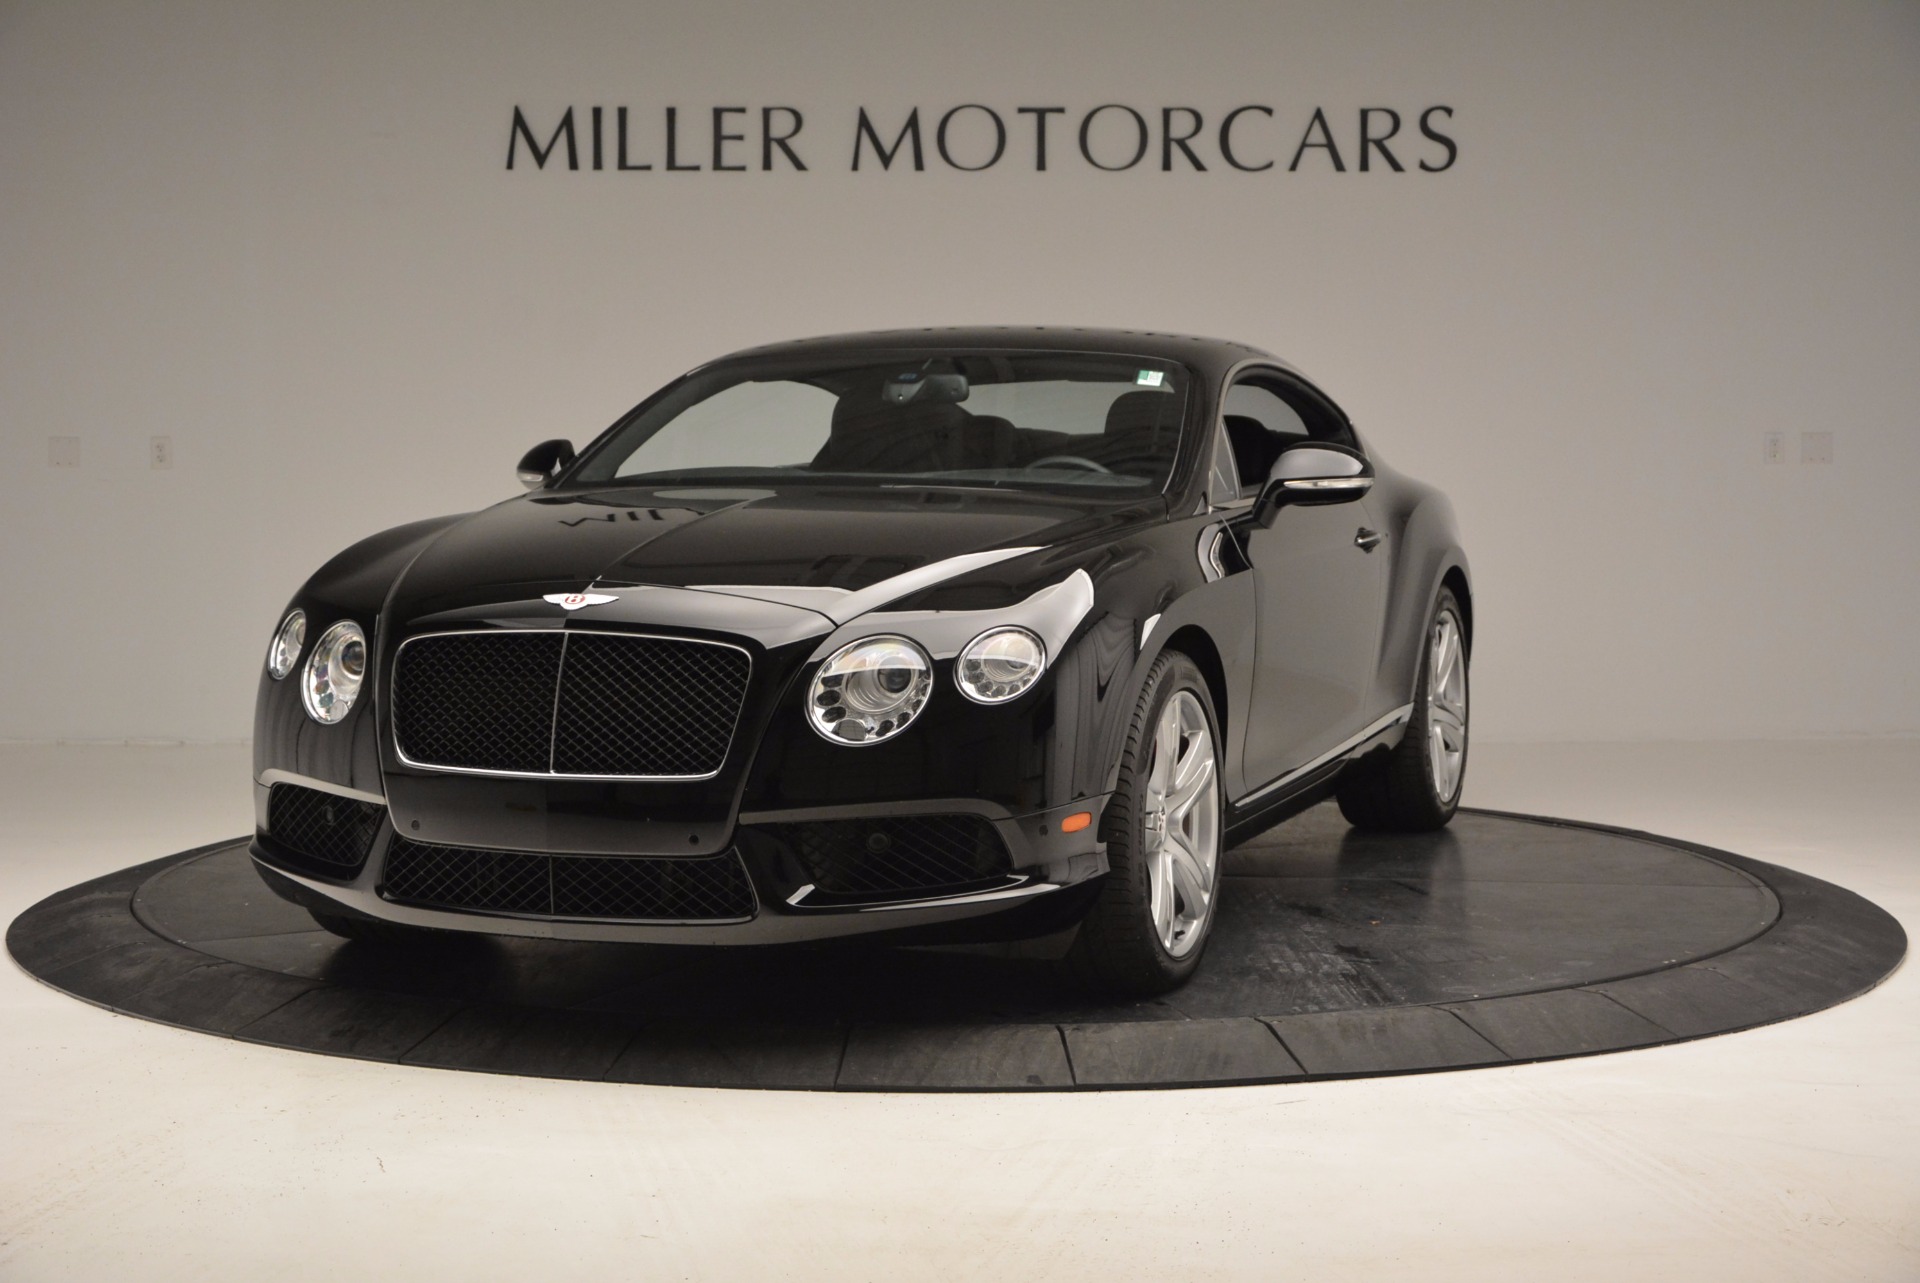 Used 2013 Bentley Continental GT V8 for sale Sold at Maserati of Westport in Westport CT 06880 1